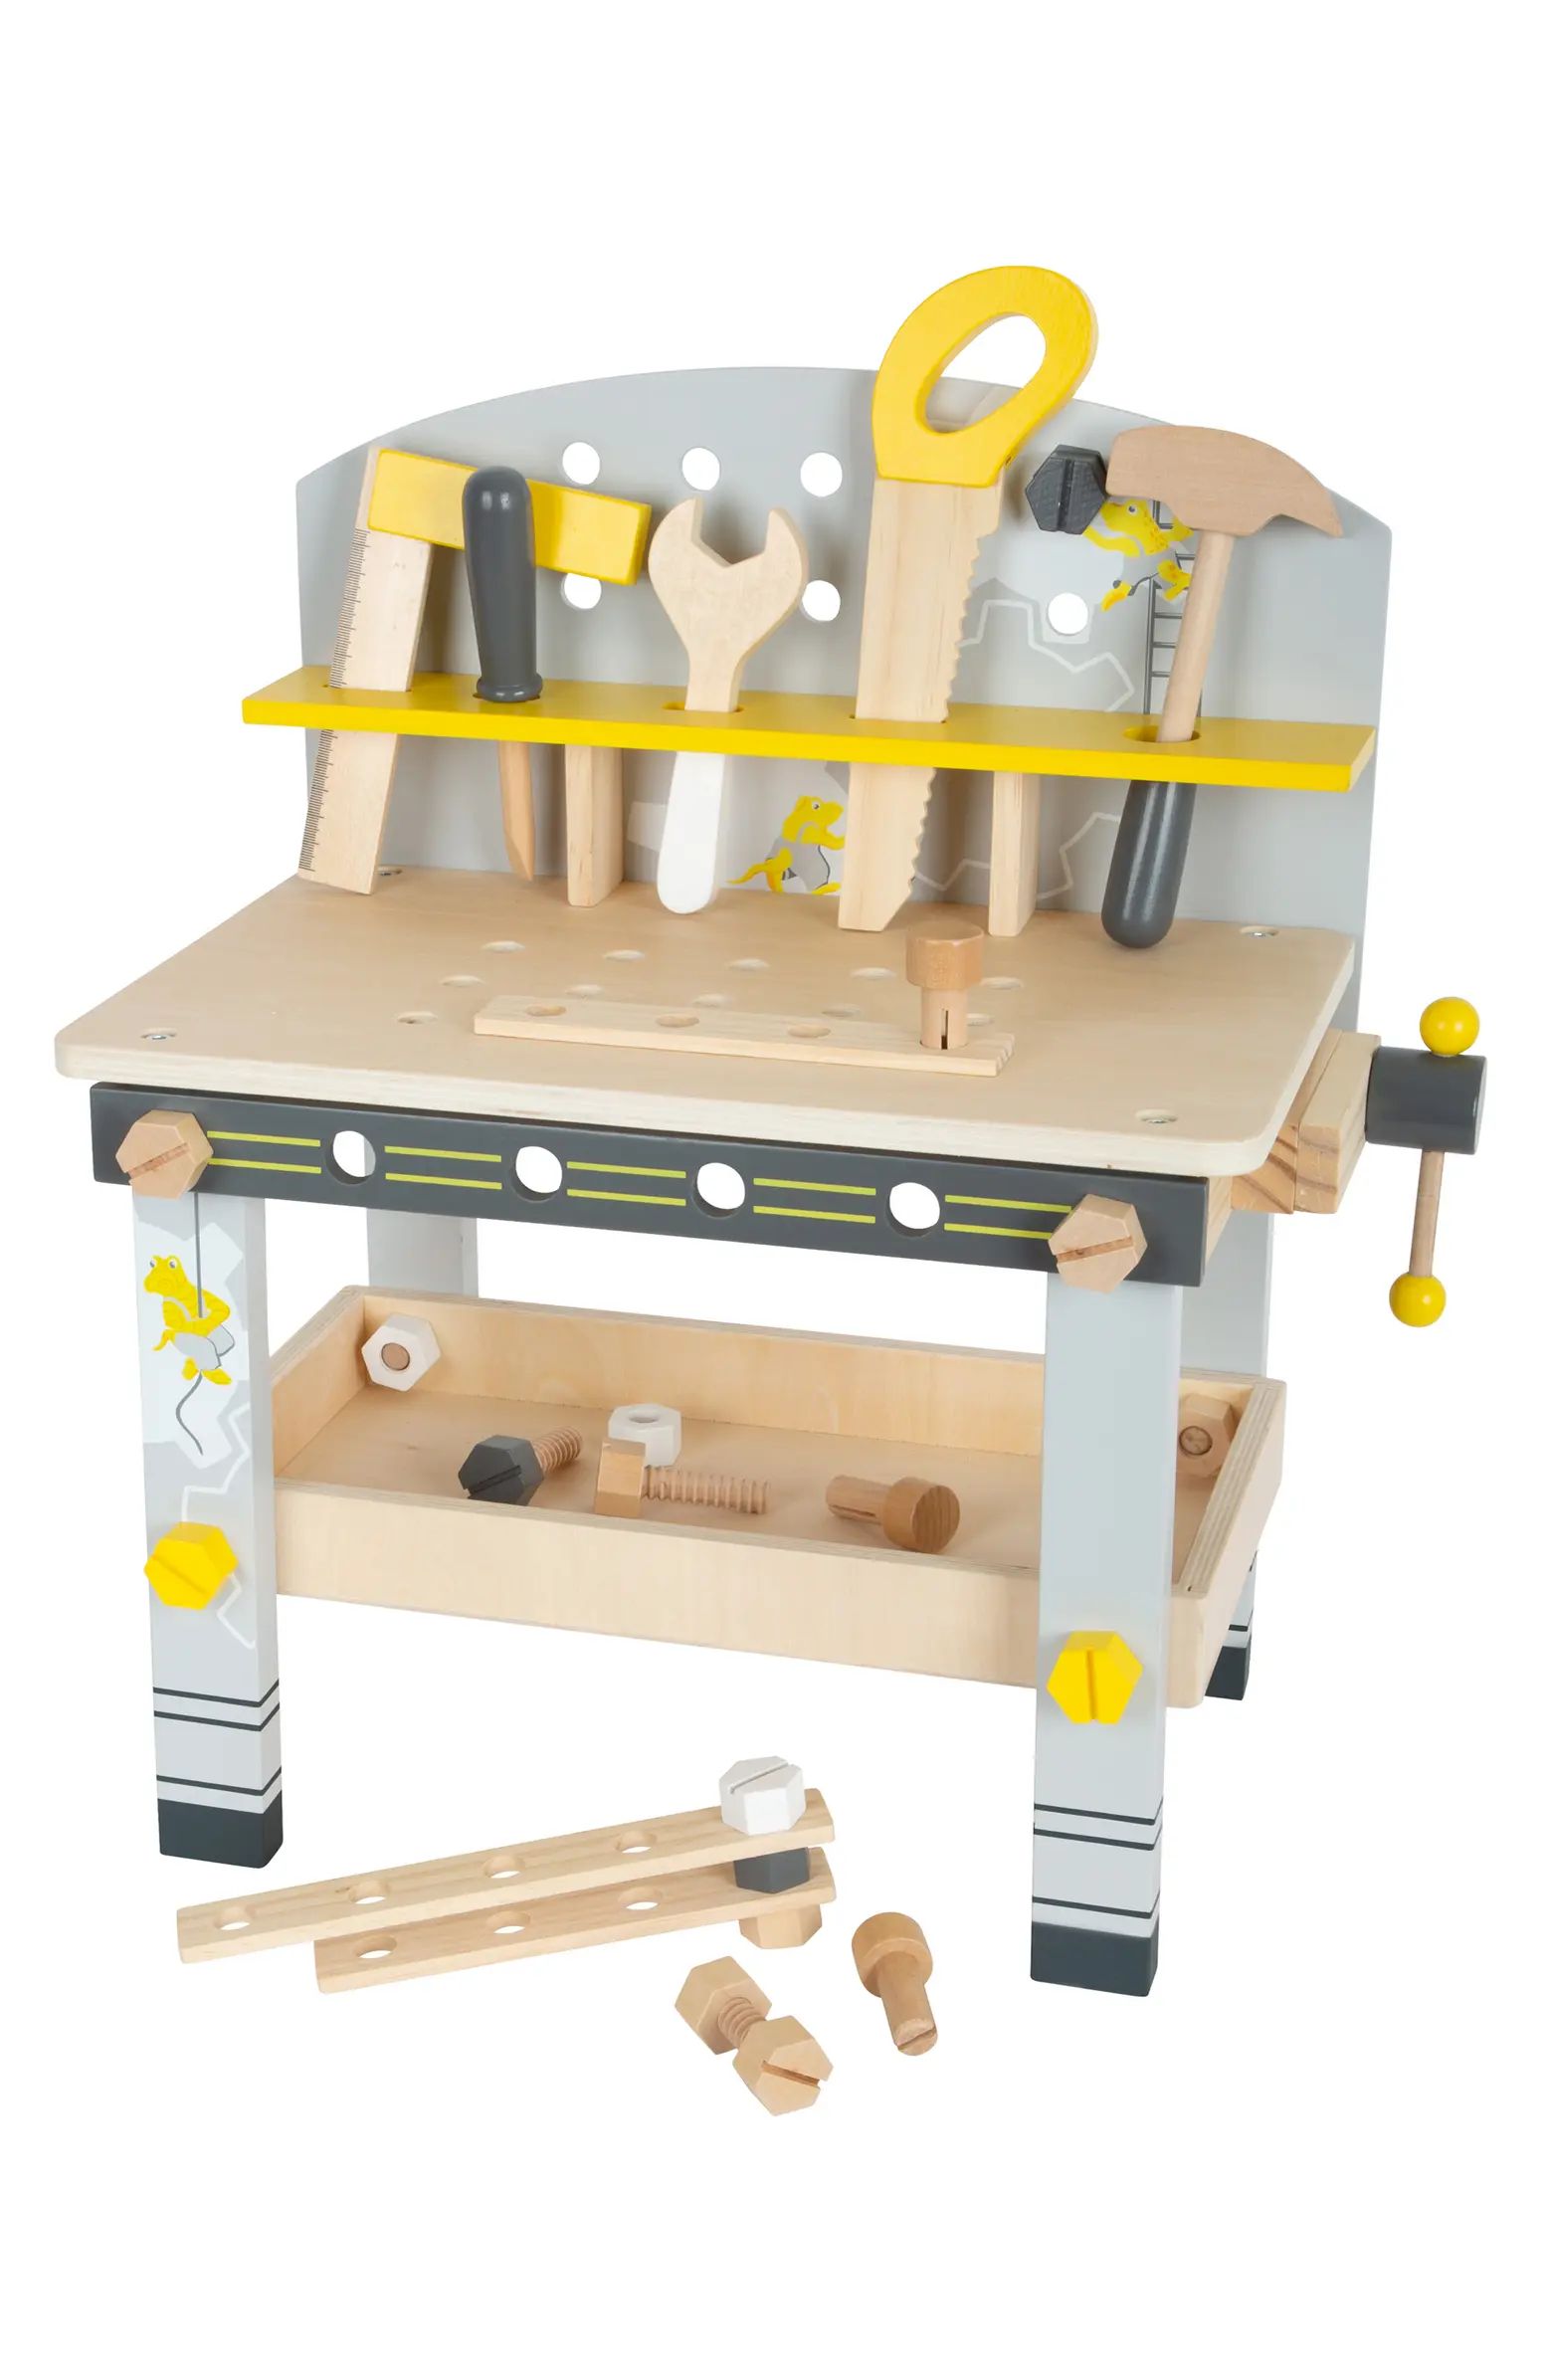 Kid's Compact Play Workbench | Nordstrom